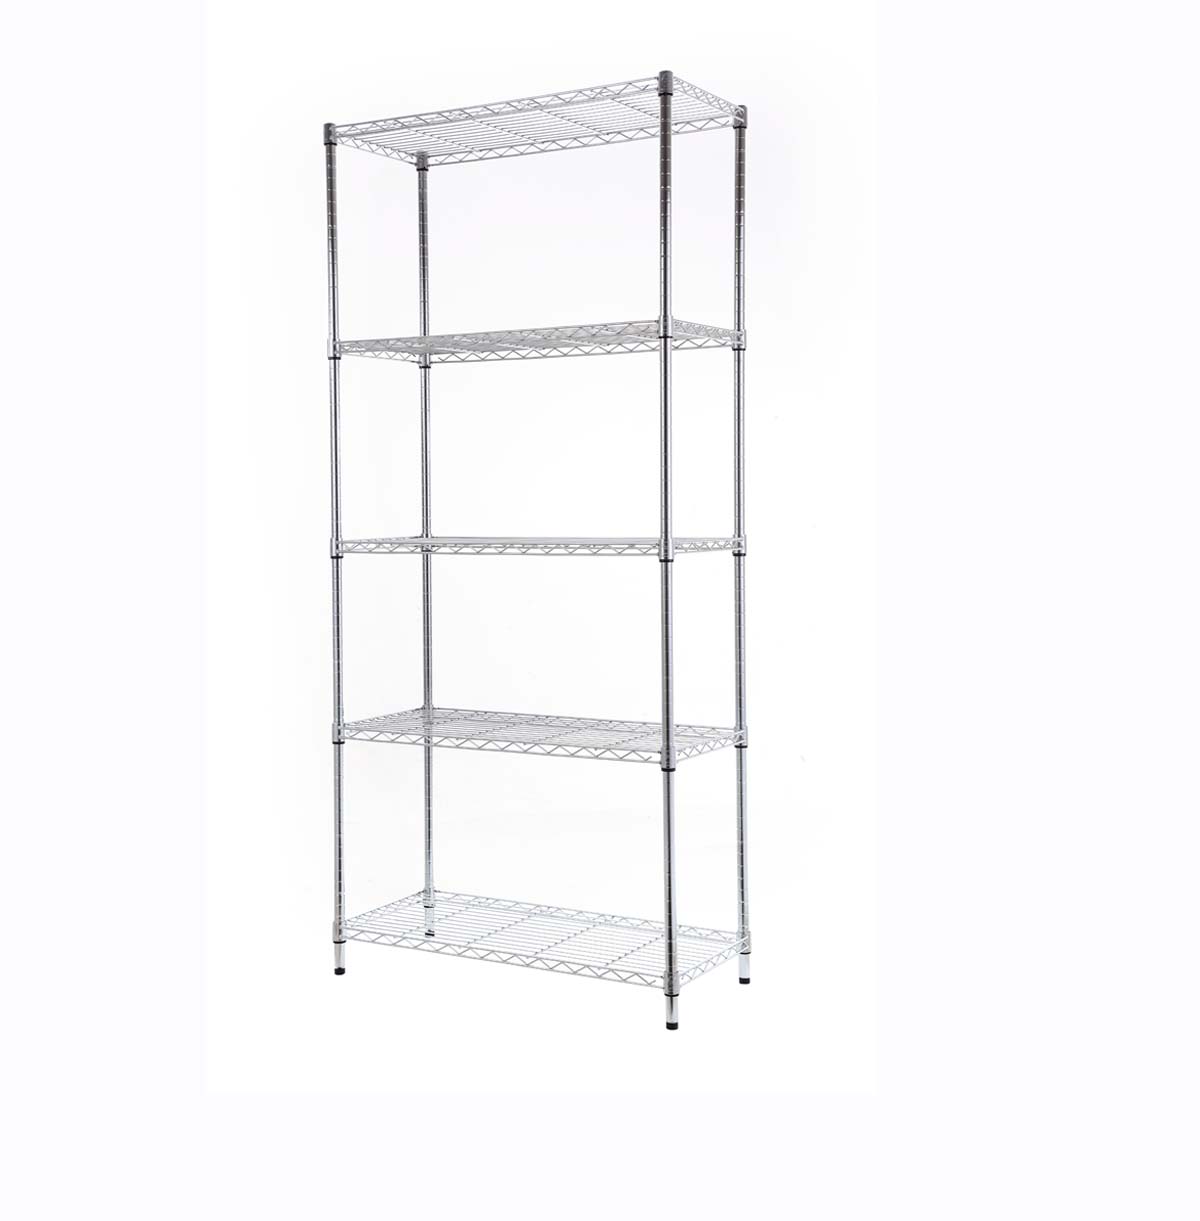 5-Tier Commercial Grade Heavy Duty Steel Wire Shelving Unit in Chrome / Adjustable Wire Storage Rack